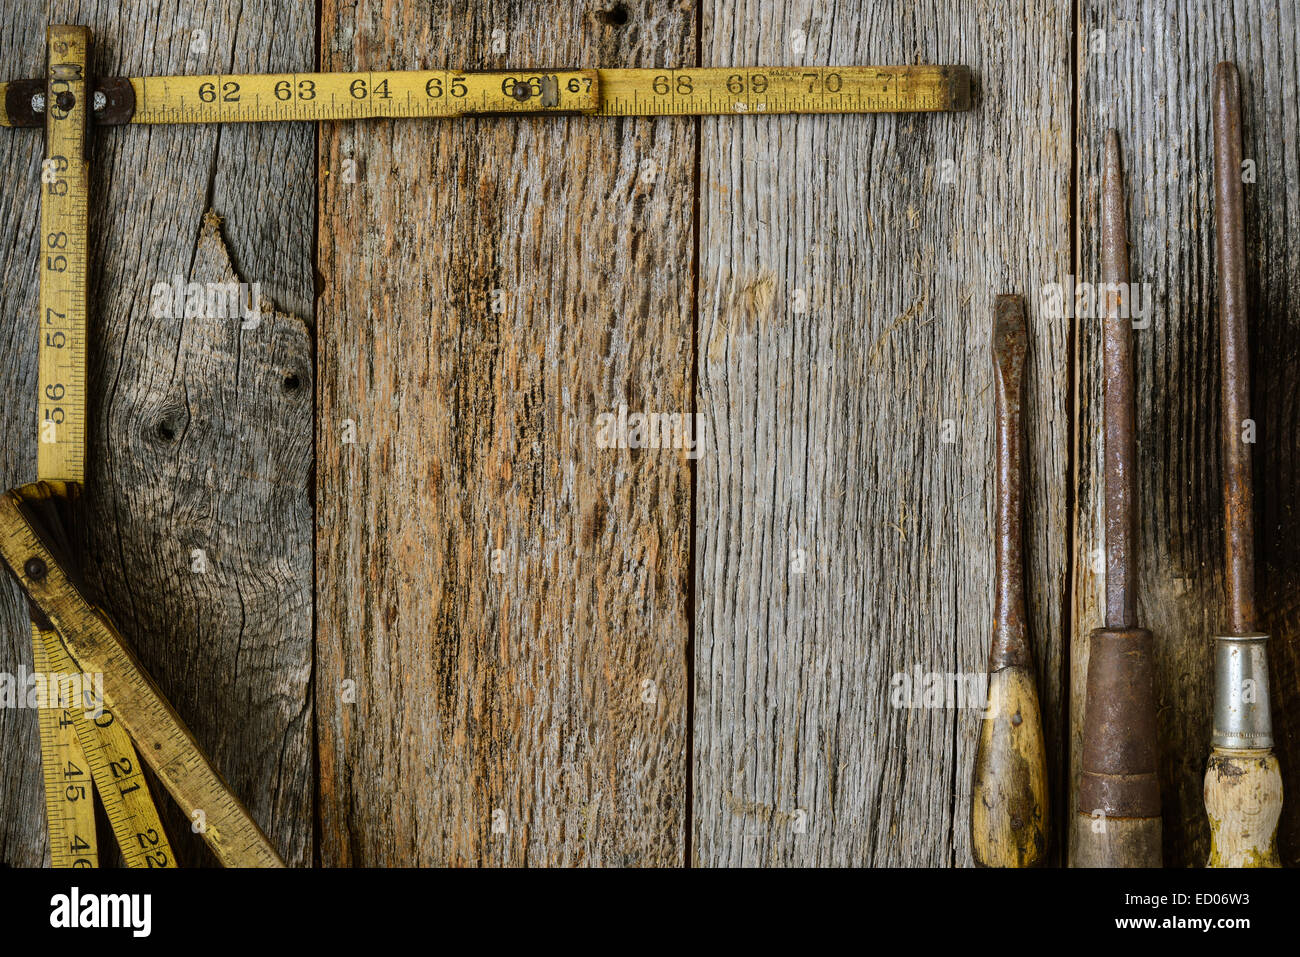 Measuring Tape and Screwdriver on Rustic Old Wood Background Stock Photo